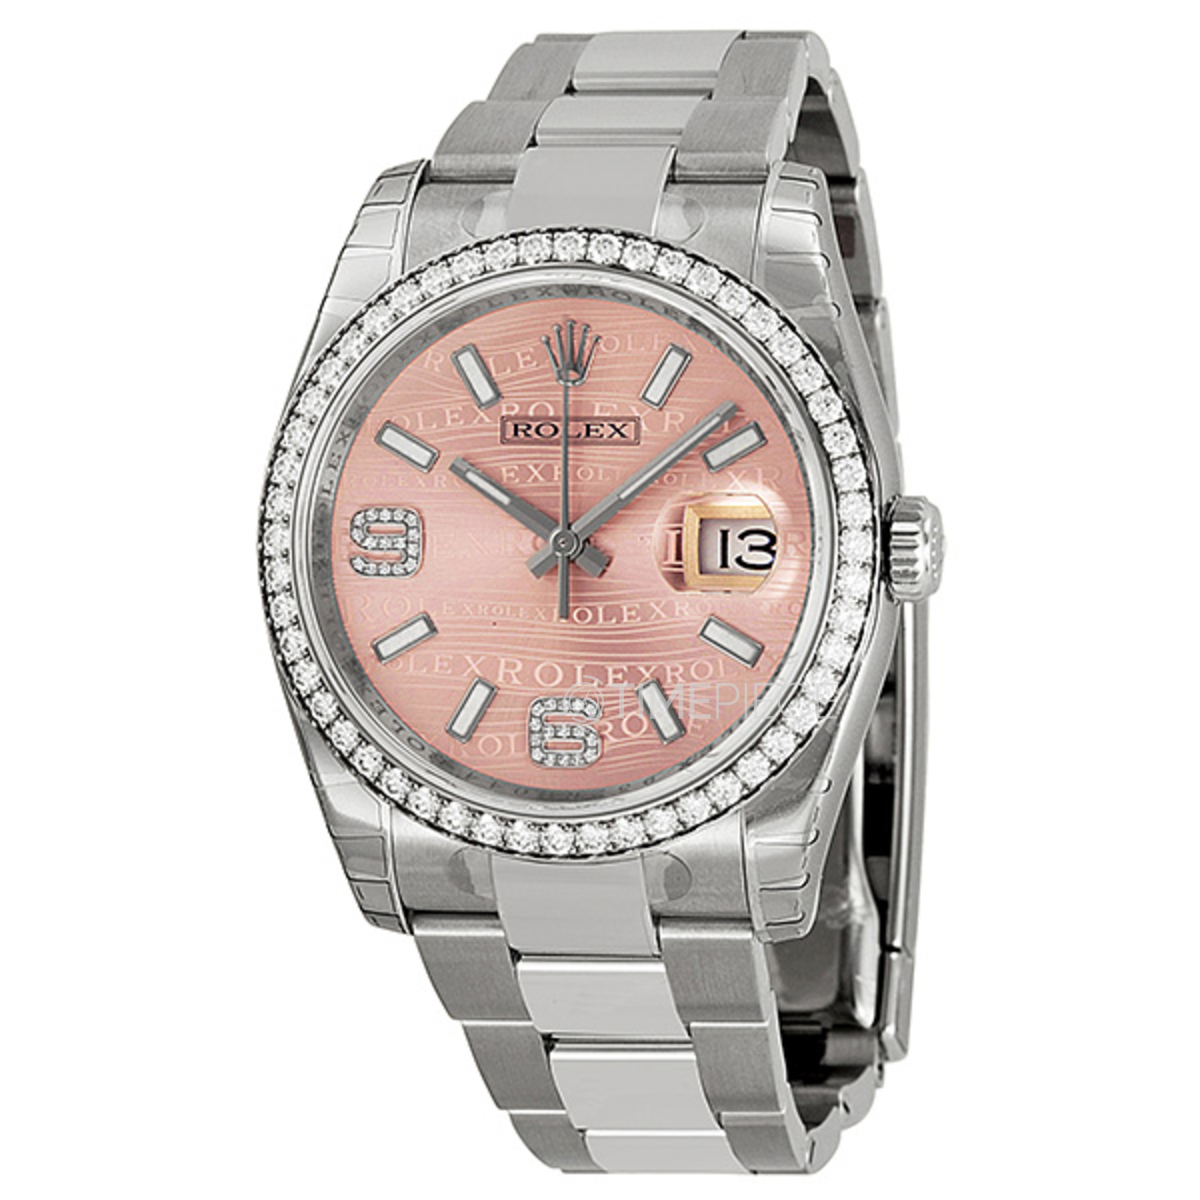 Rolex Oyster Perpetual Datejust 36 Pink Wave Dial Stainless Steel Bracelet Ladies Watch 116244PWSDAO